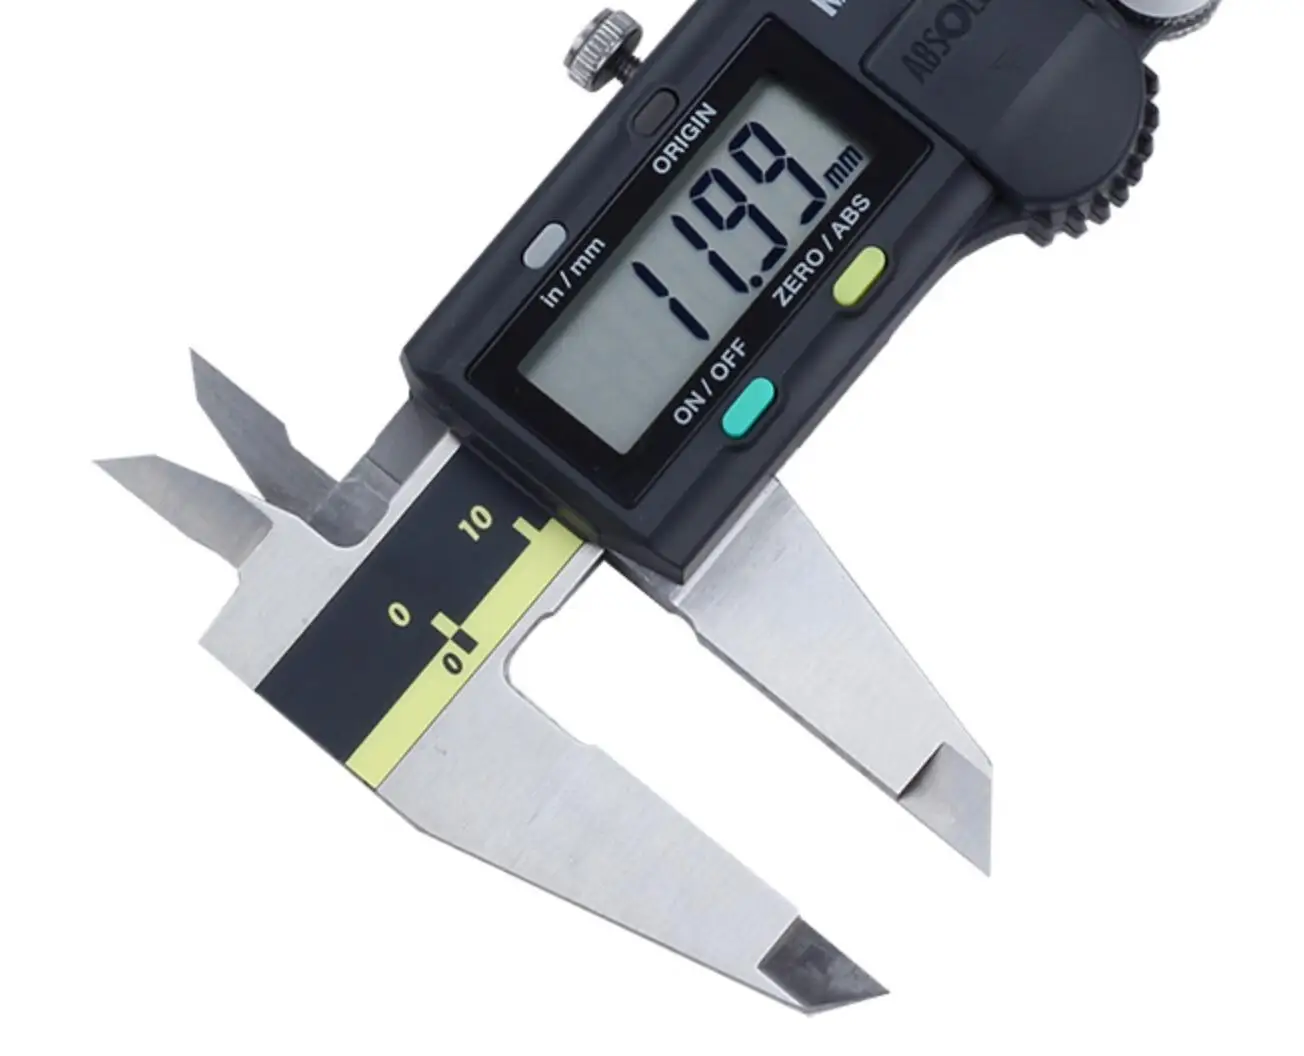 

NEW Mitutoyo CNC inmm Digital Vernier Calipers 0-8inch 0-200mm 500-197-20 Caliper LCD Electronic Measuring Stainless Steel Tools